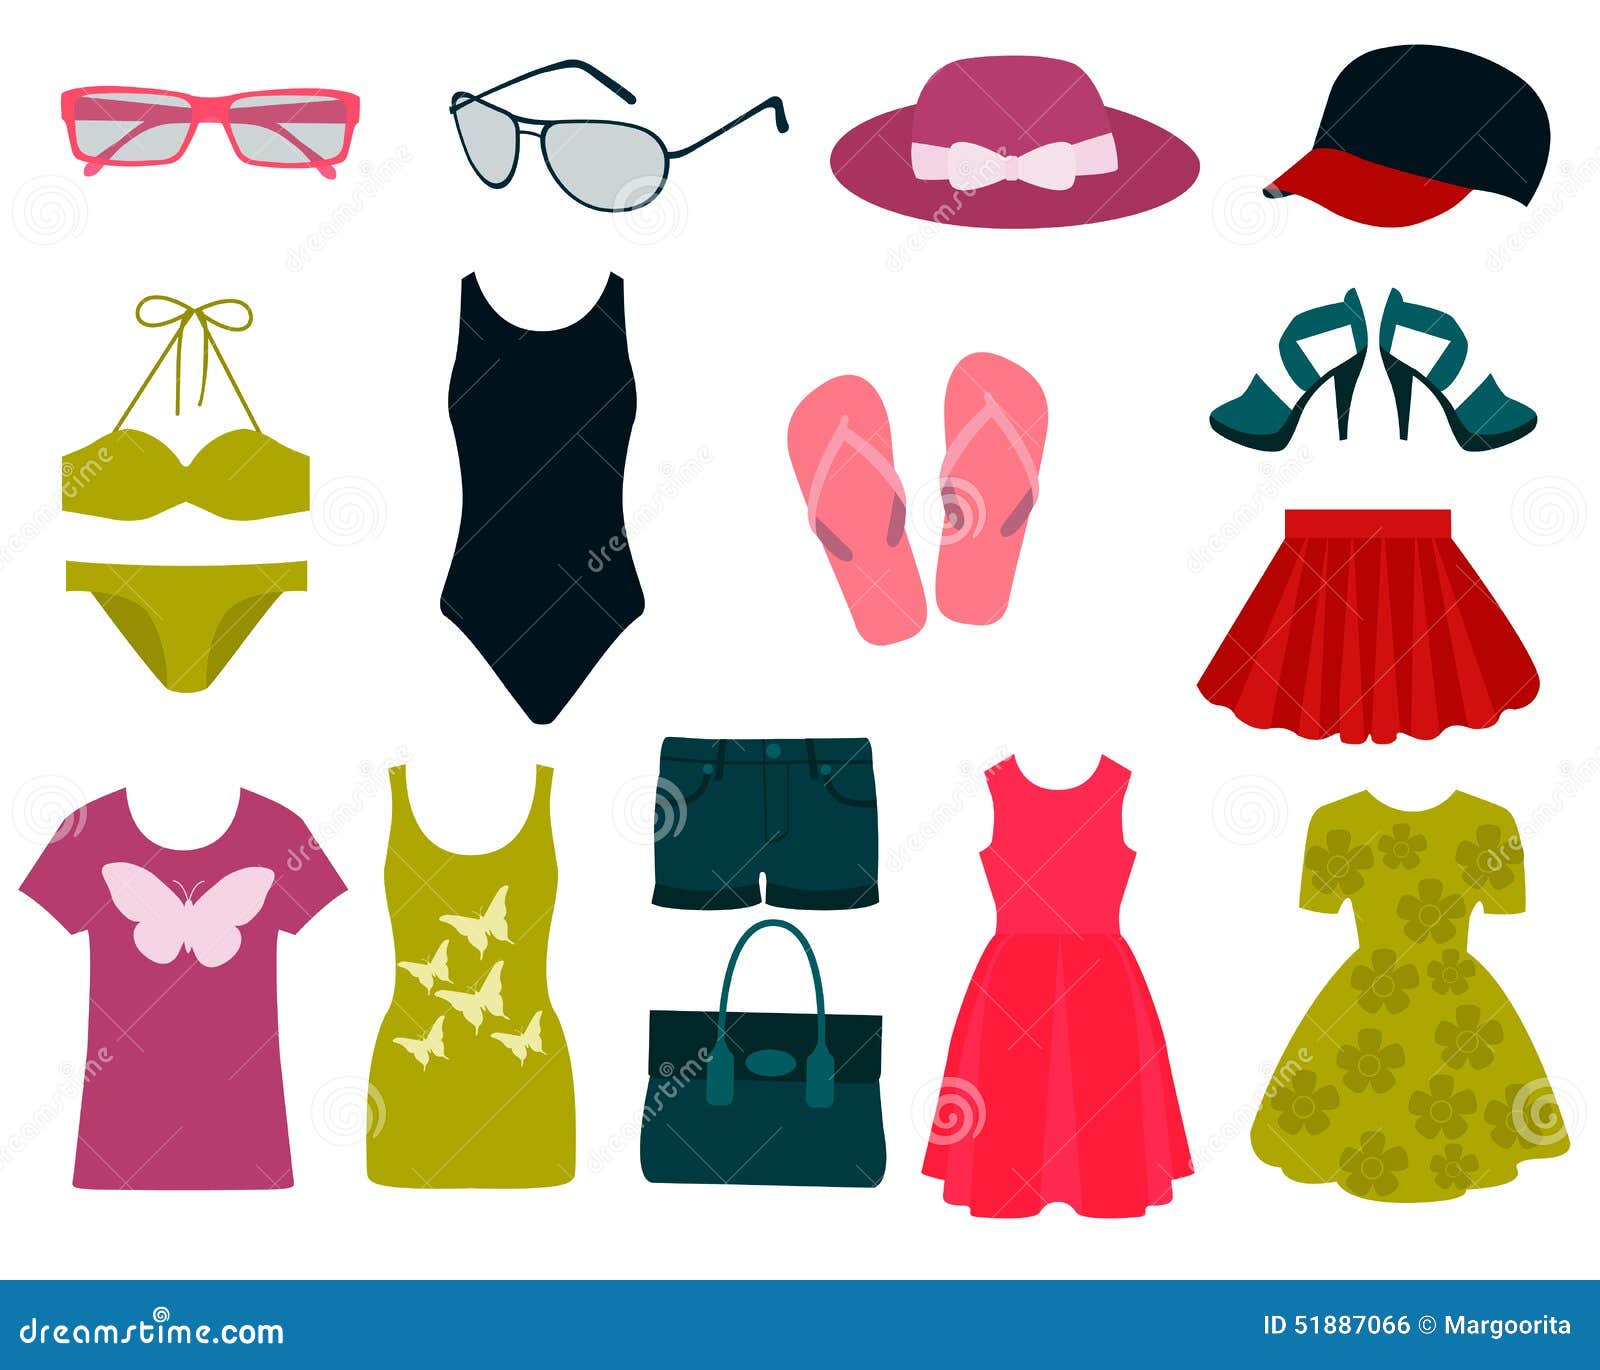 clipart of summer clothes - photo #15